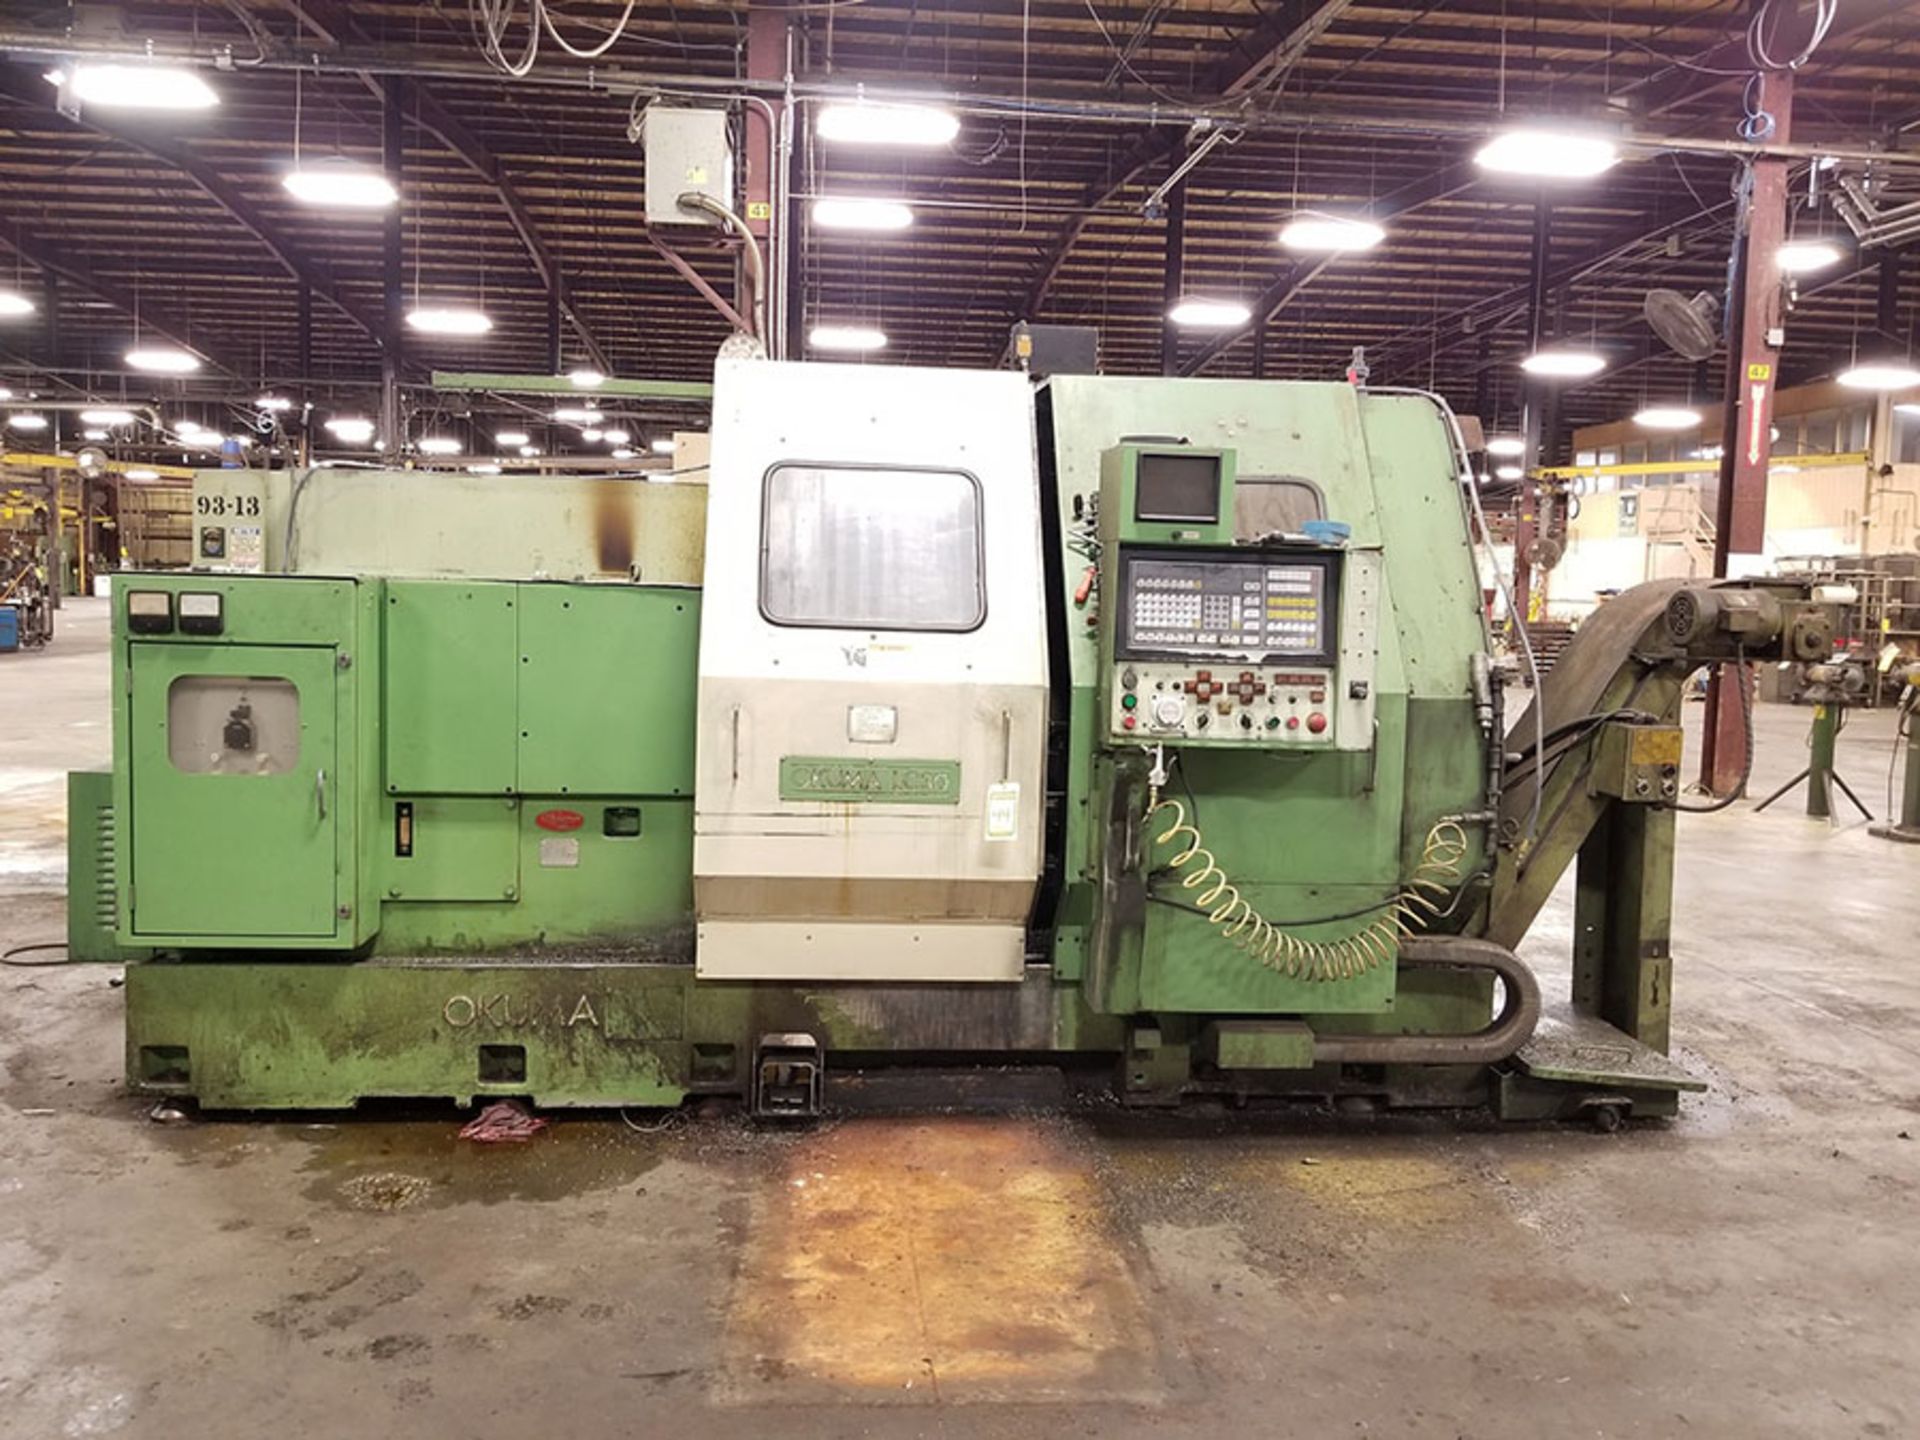 OKUMA LC-30 CNC LATHE, S/N 0319, 8 & 7-TOOL POSITION TURRETS, OUTFEED CHIP CONVEYOR - Image 3 of 16